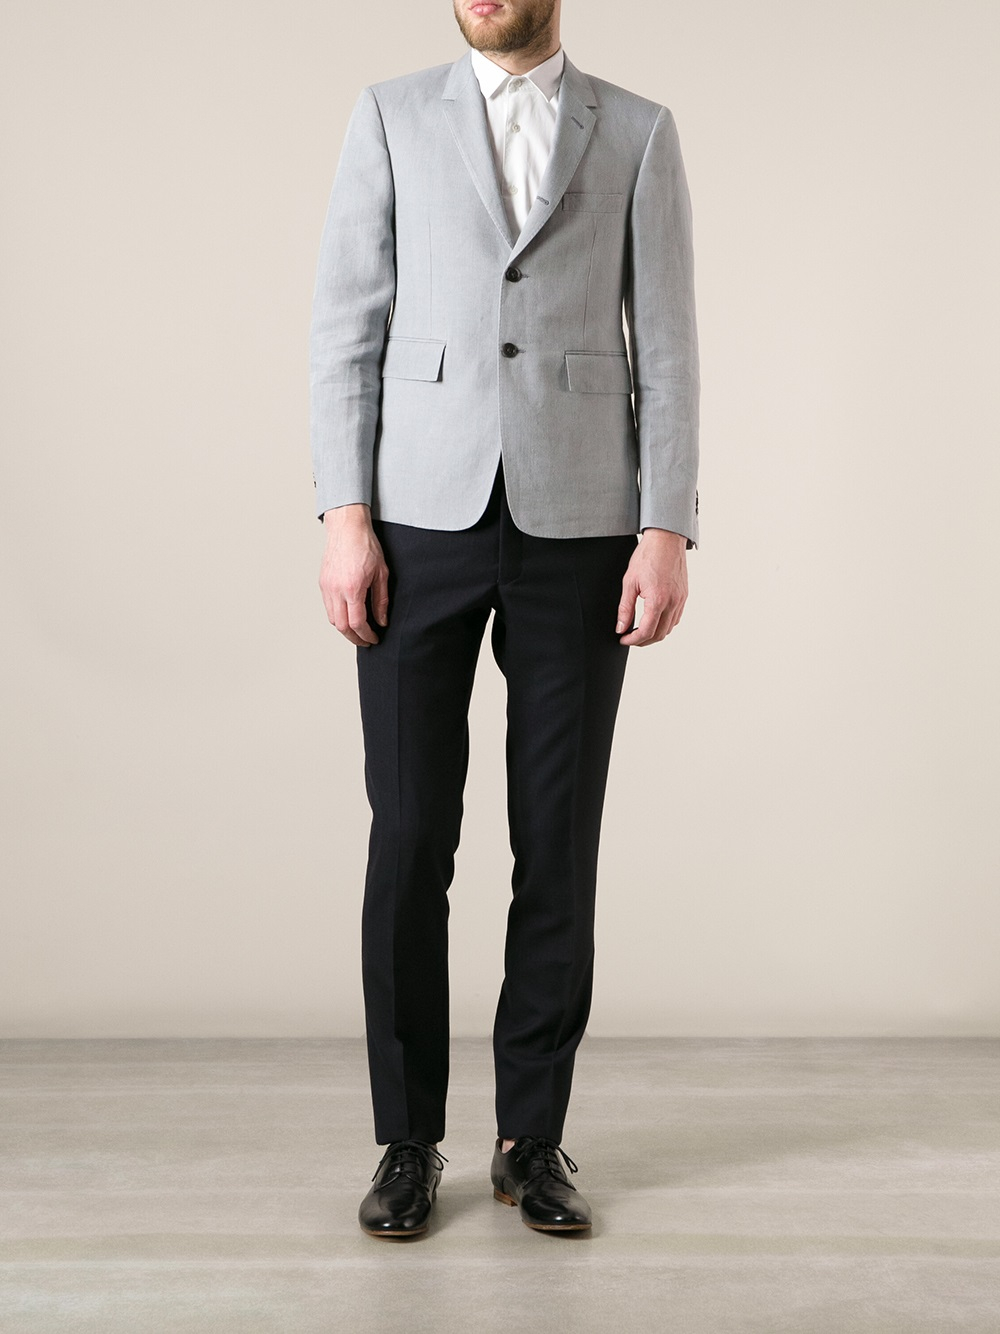 Lyst - Thom Browne Slim Tailored Trousers in Blue for Men